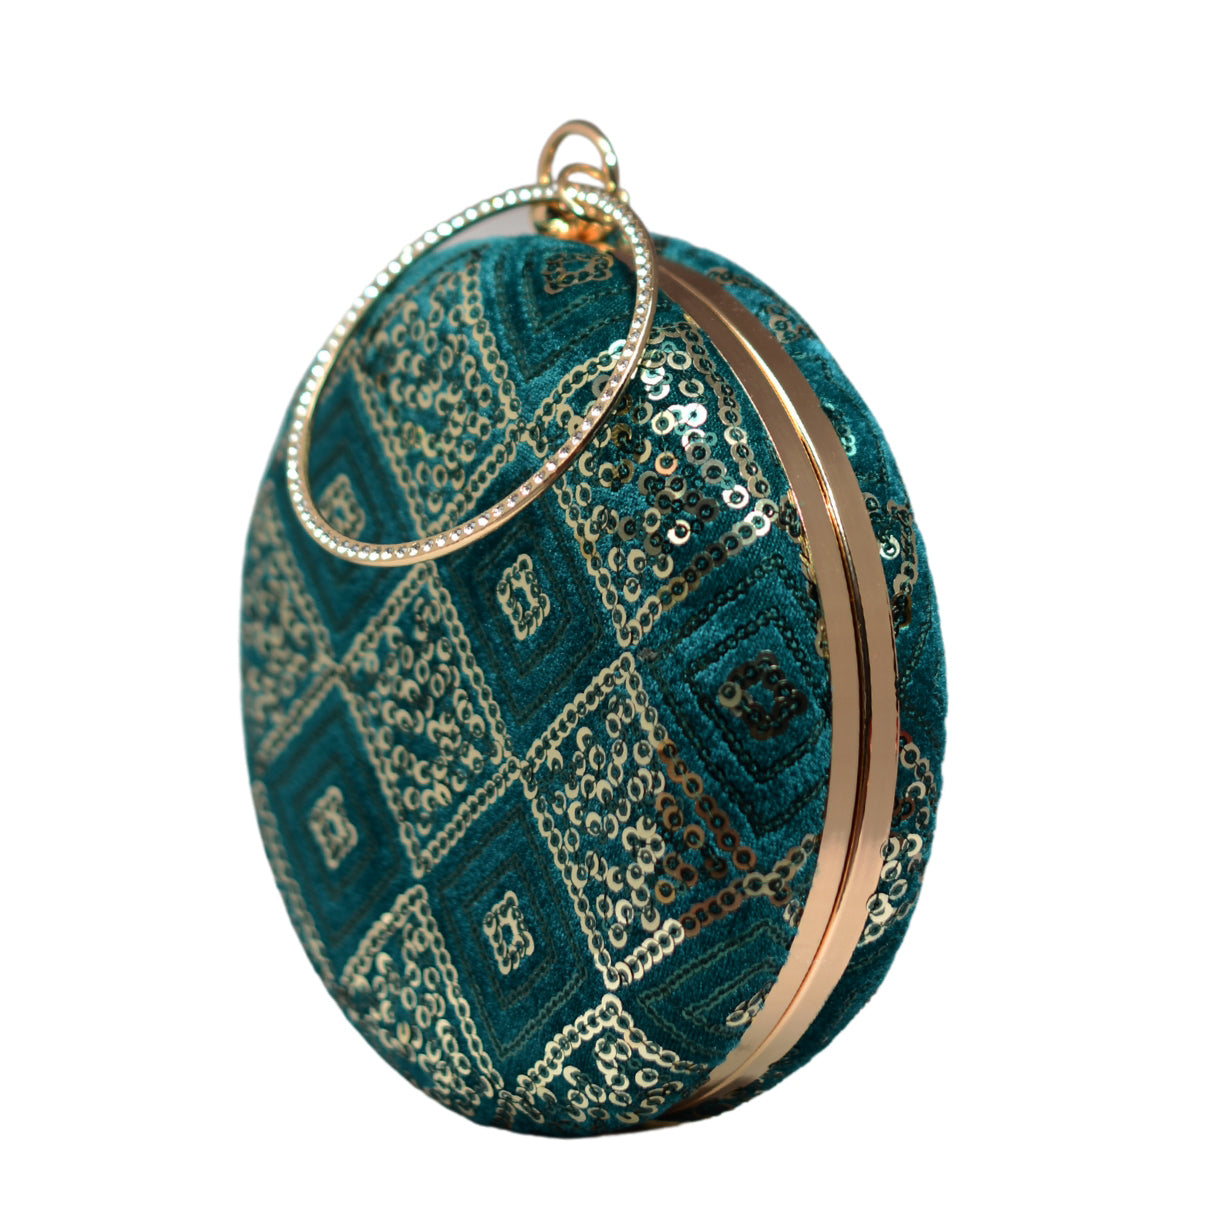 Sea Green Embroidery Round Clutch